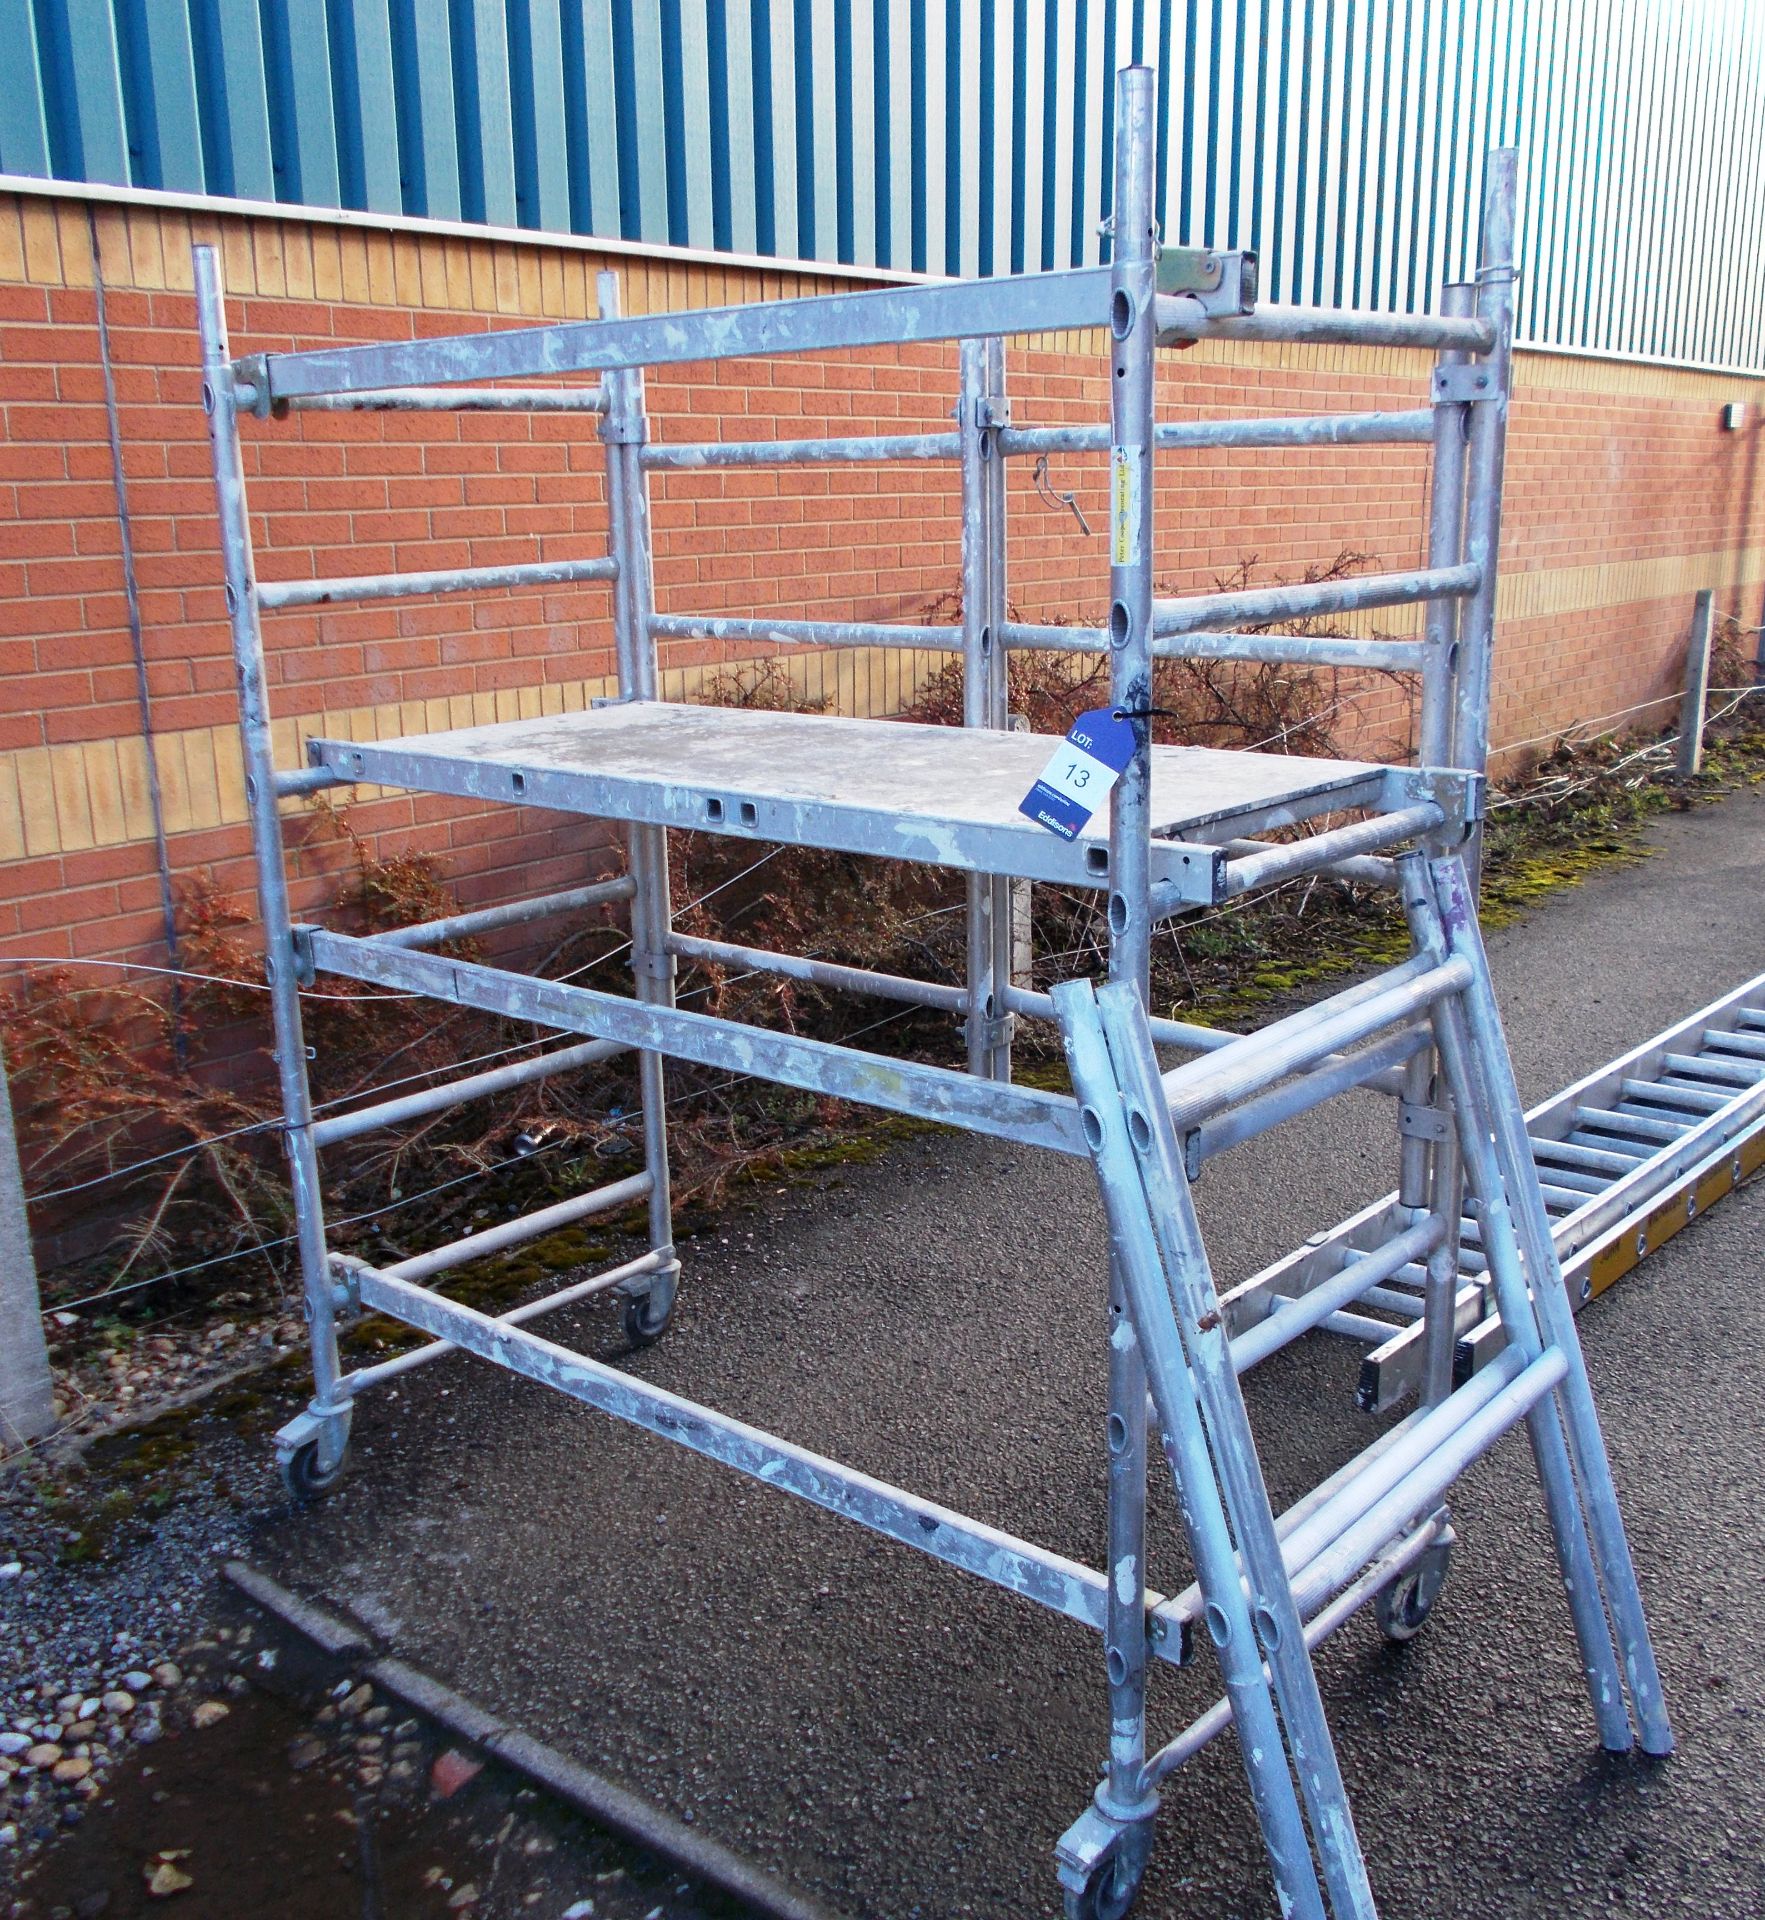 Mobile collapsible lightweight scaffolding tower, Width approximately 1.6m